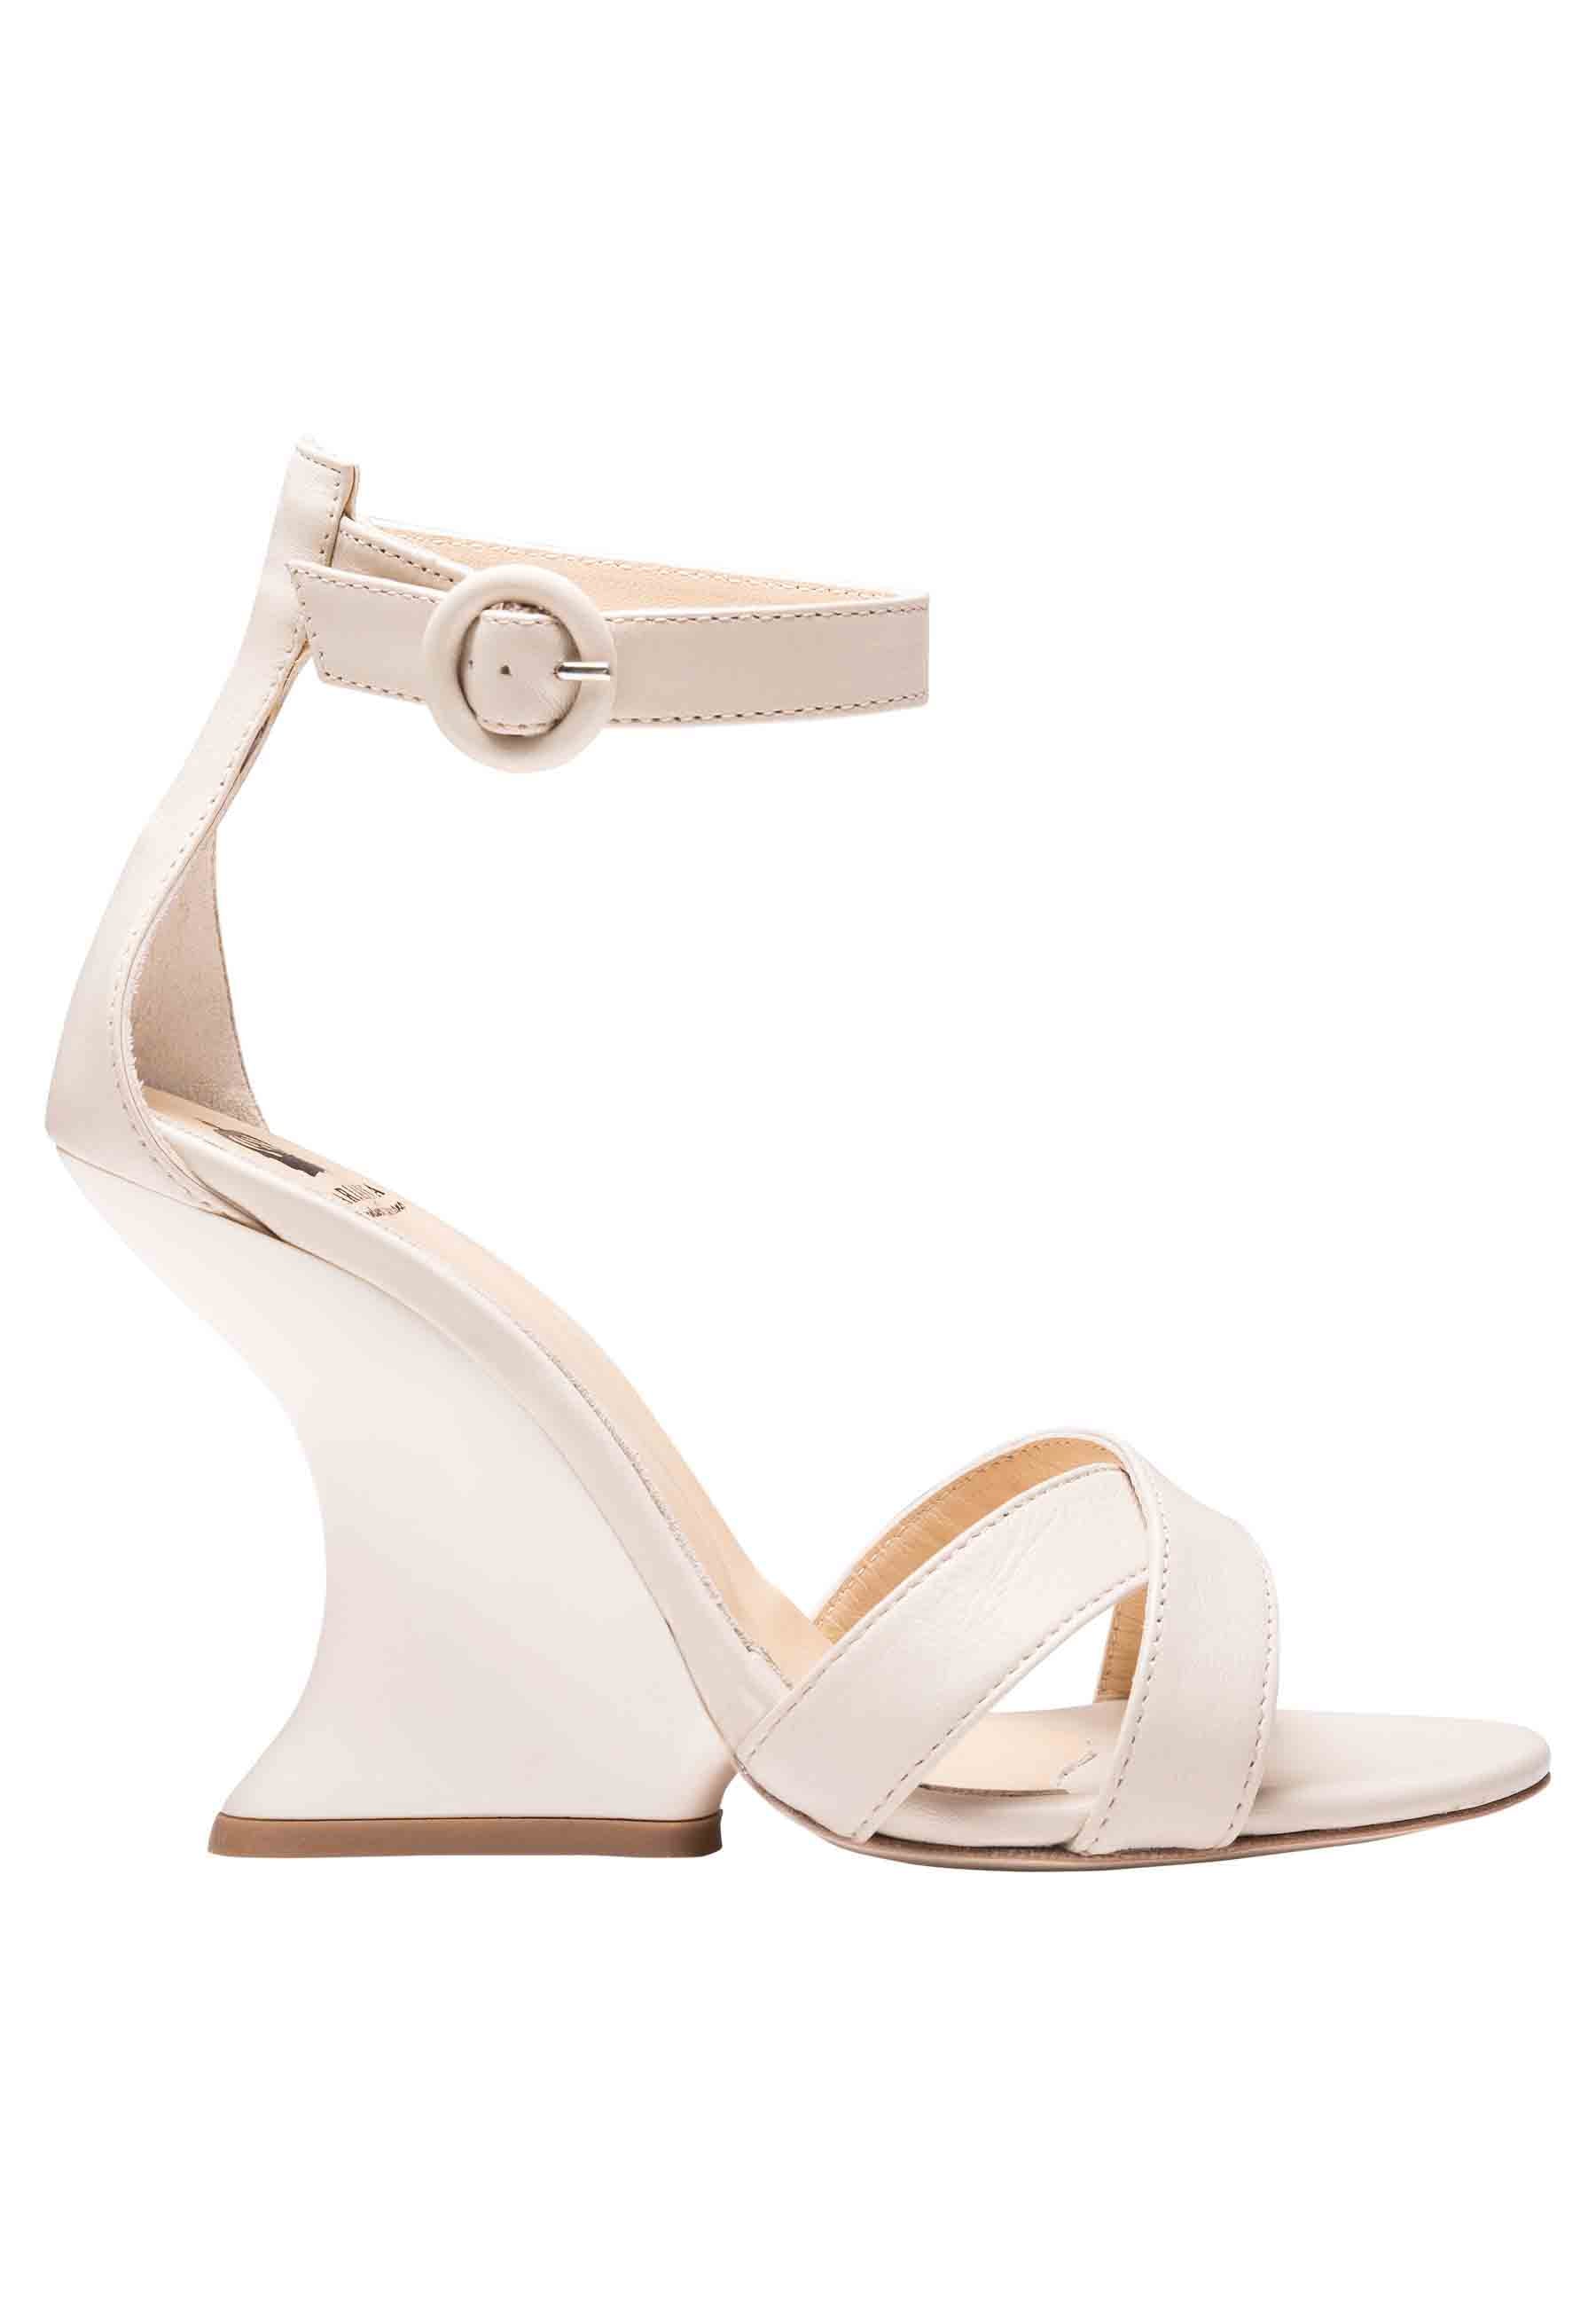 Women's white leather sandals with high wedge and ankle strap